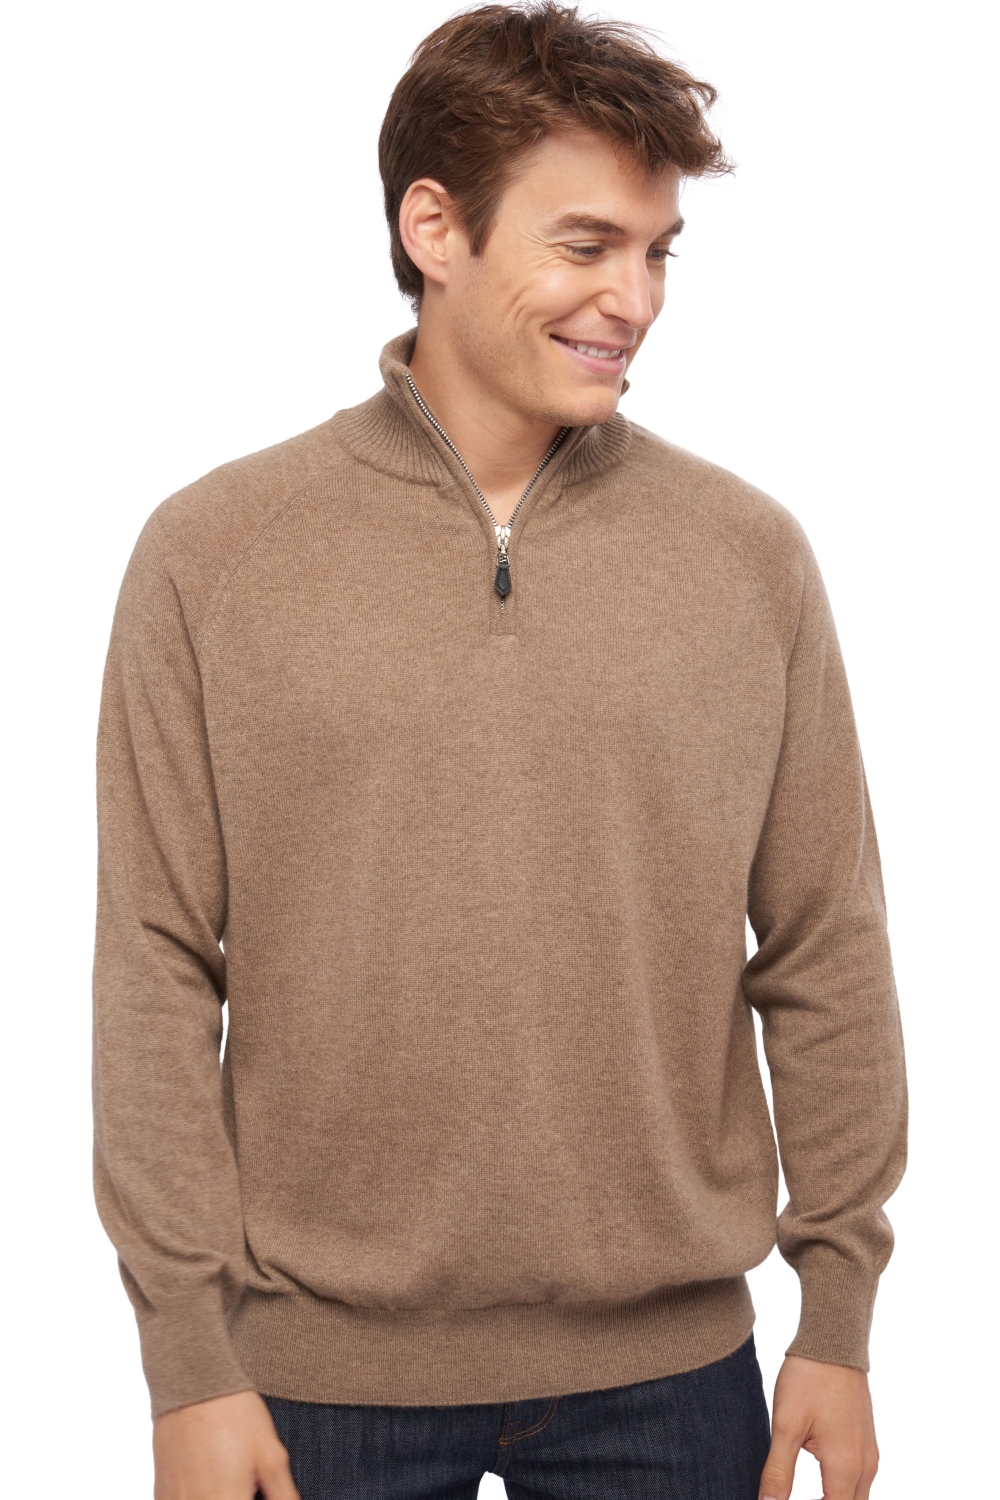 Cachemire pull homme natural vez natural terra 3xl